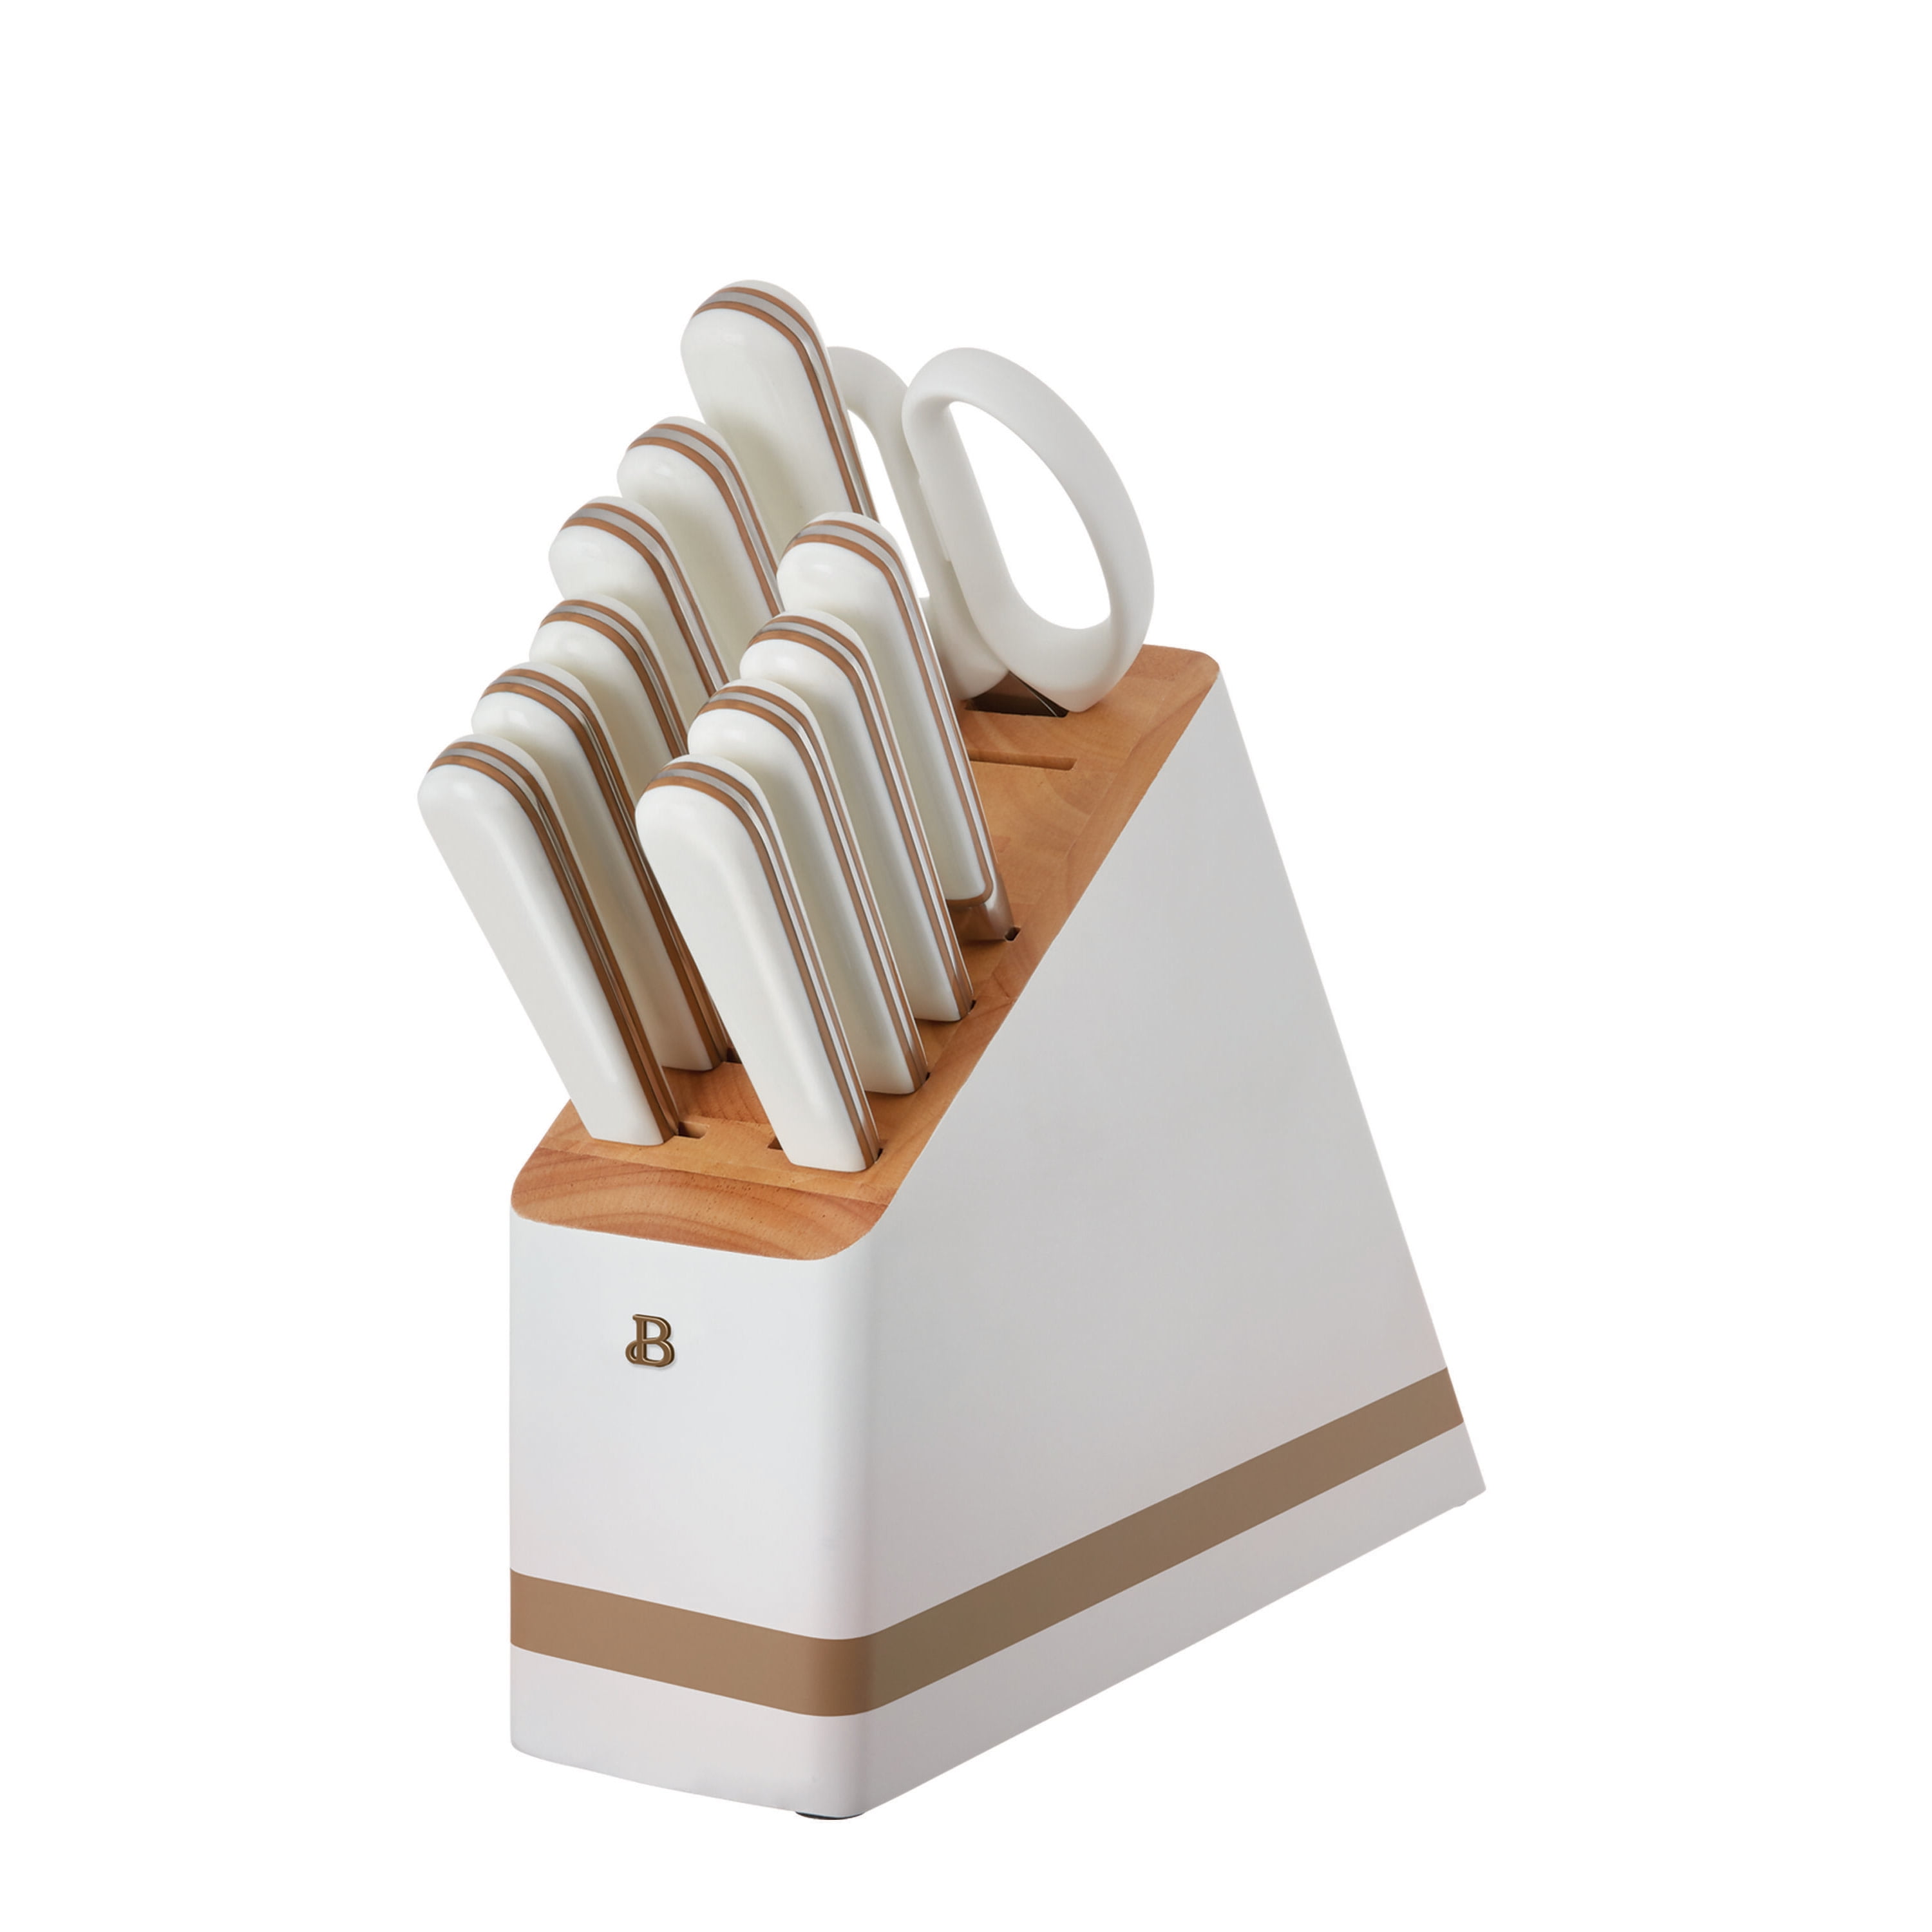 Beautiful 12-piece Forged Kitchen Knife Set in White with Wood Storage Block, by Drew Barrymore